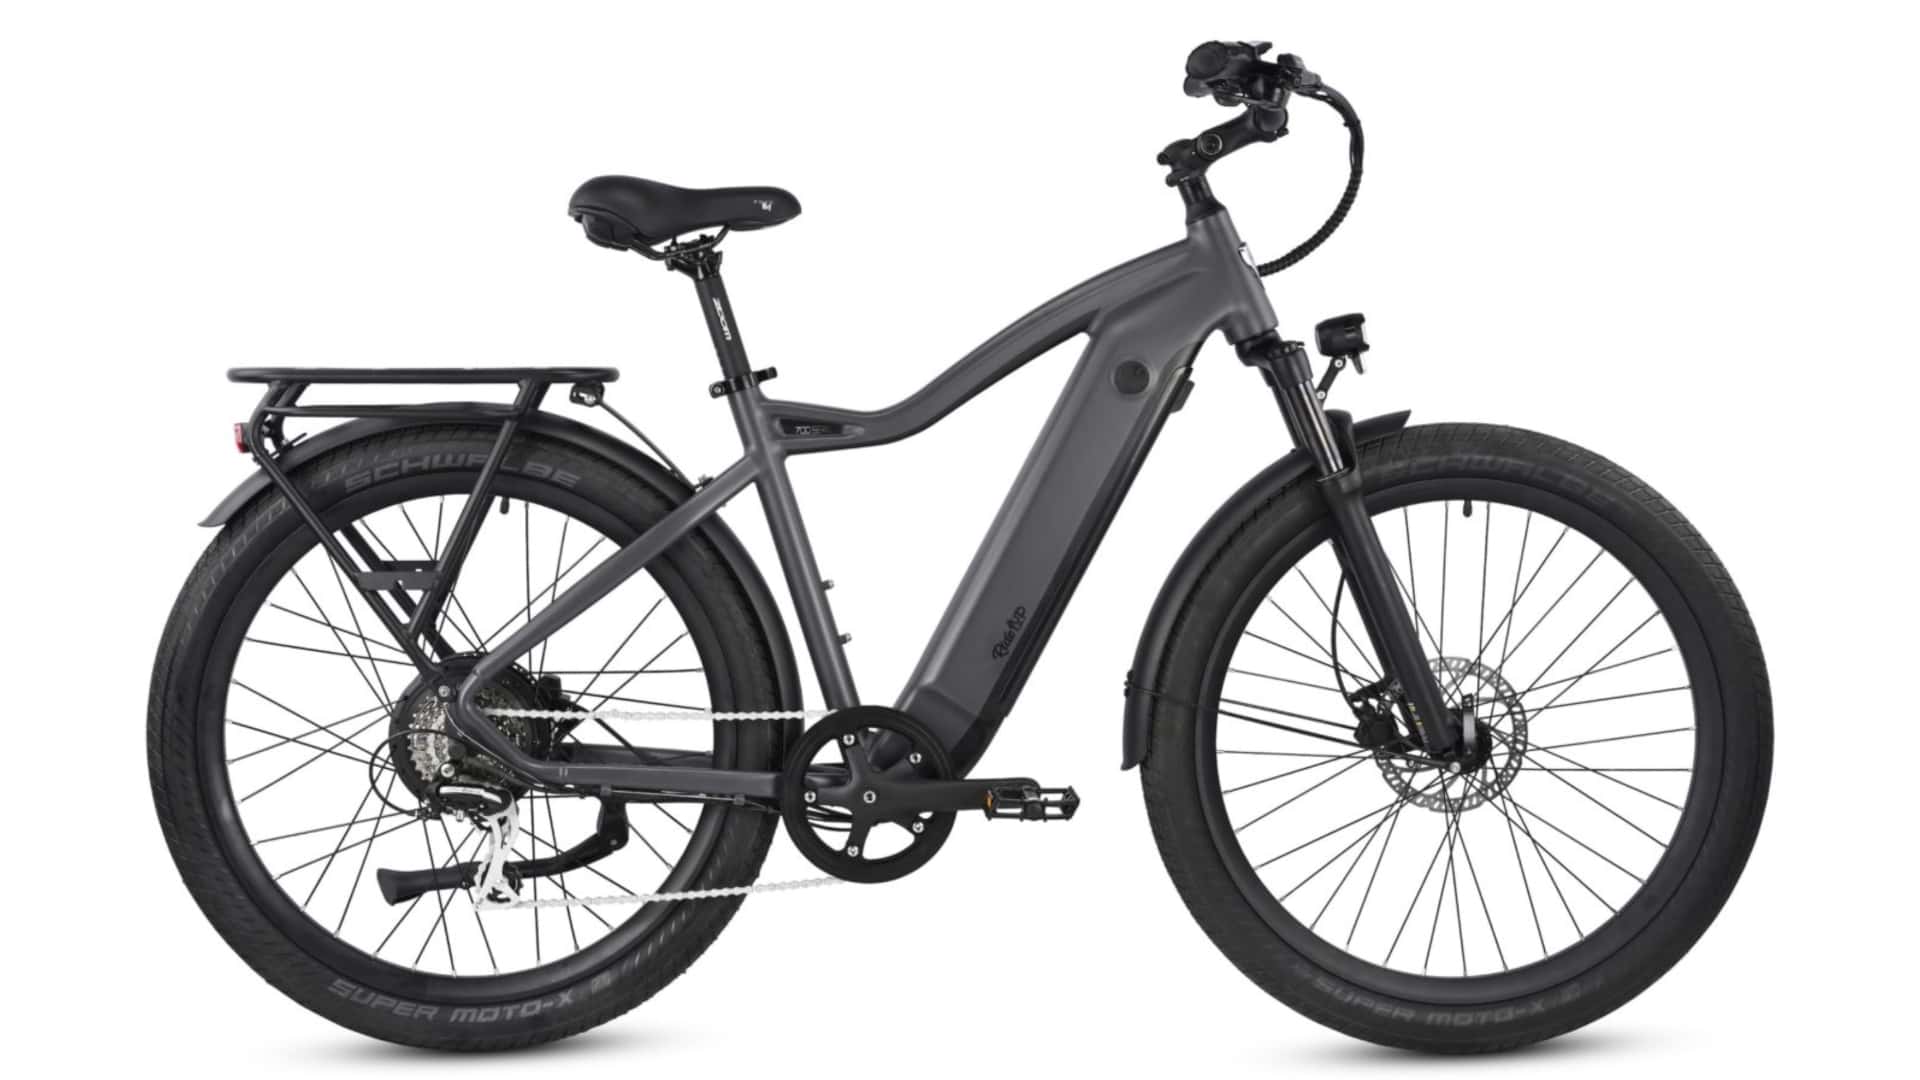 ride1up refreshes popular 700 series e-bike with tech updates